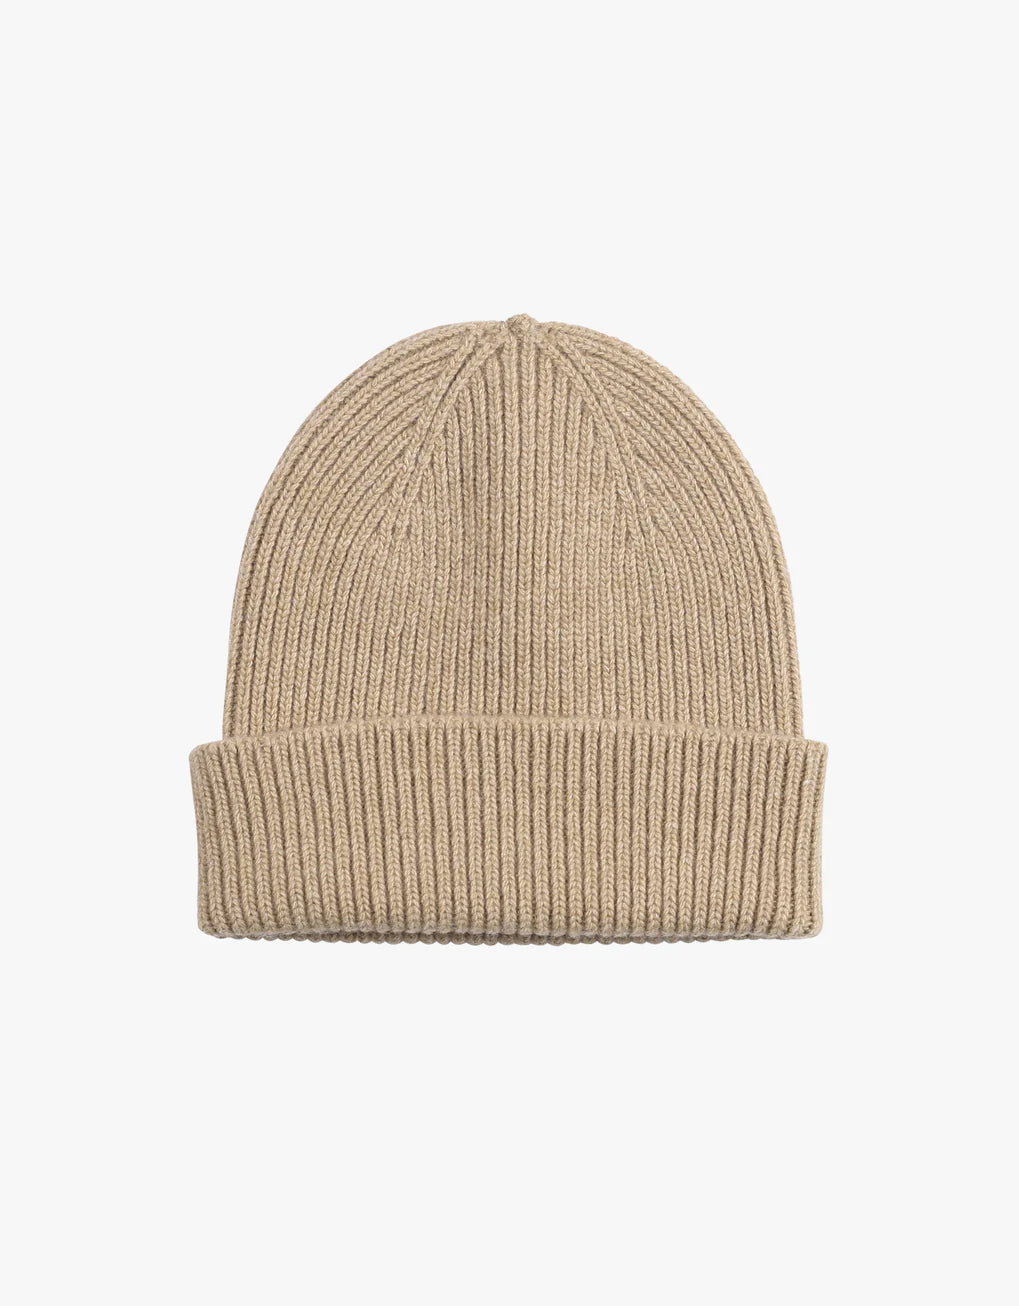 A Colorful Standard Merino Wool Beanie in tan on a white background.